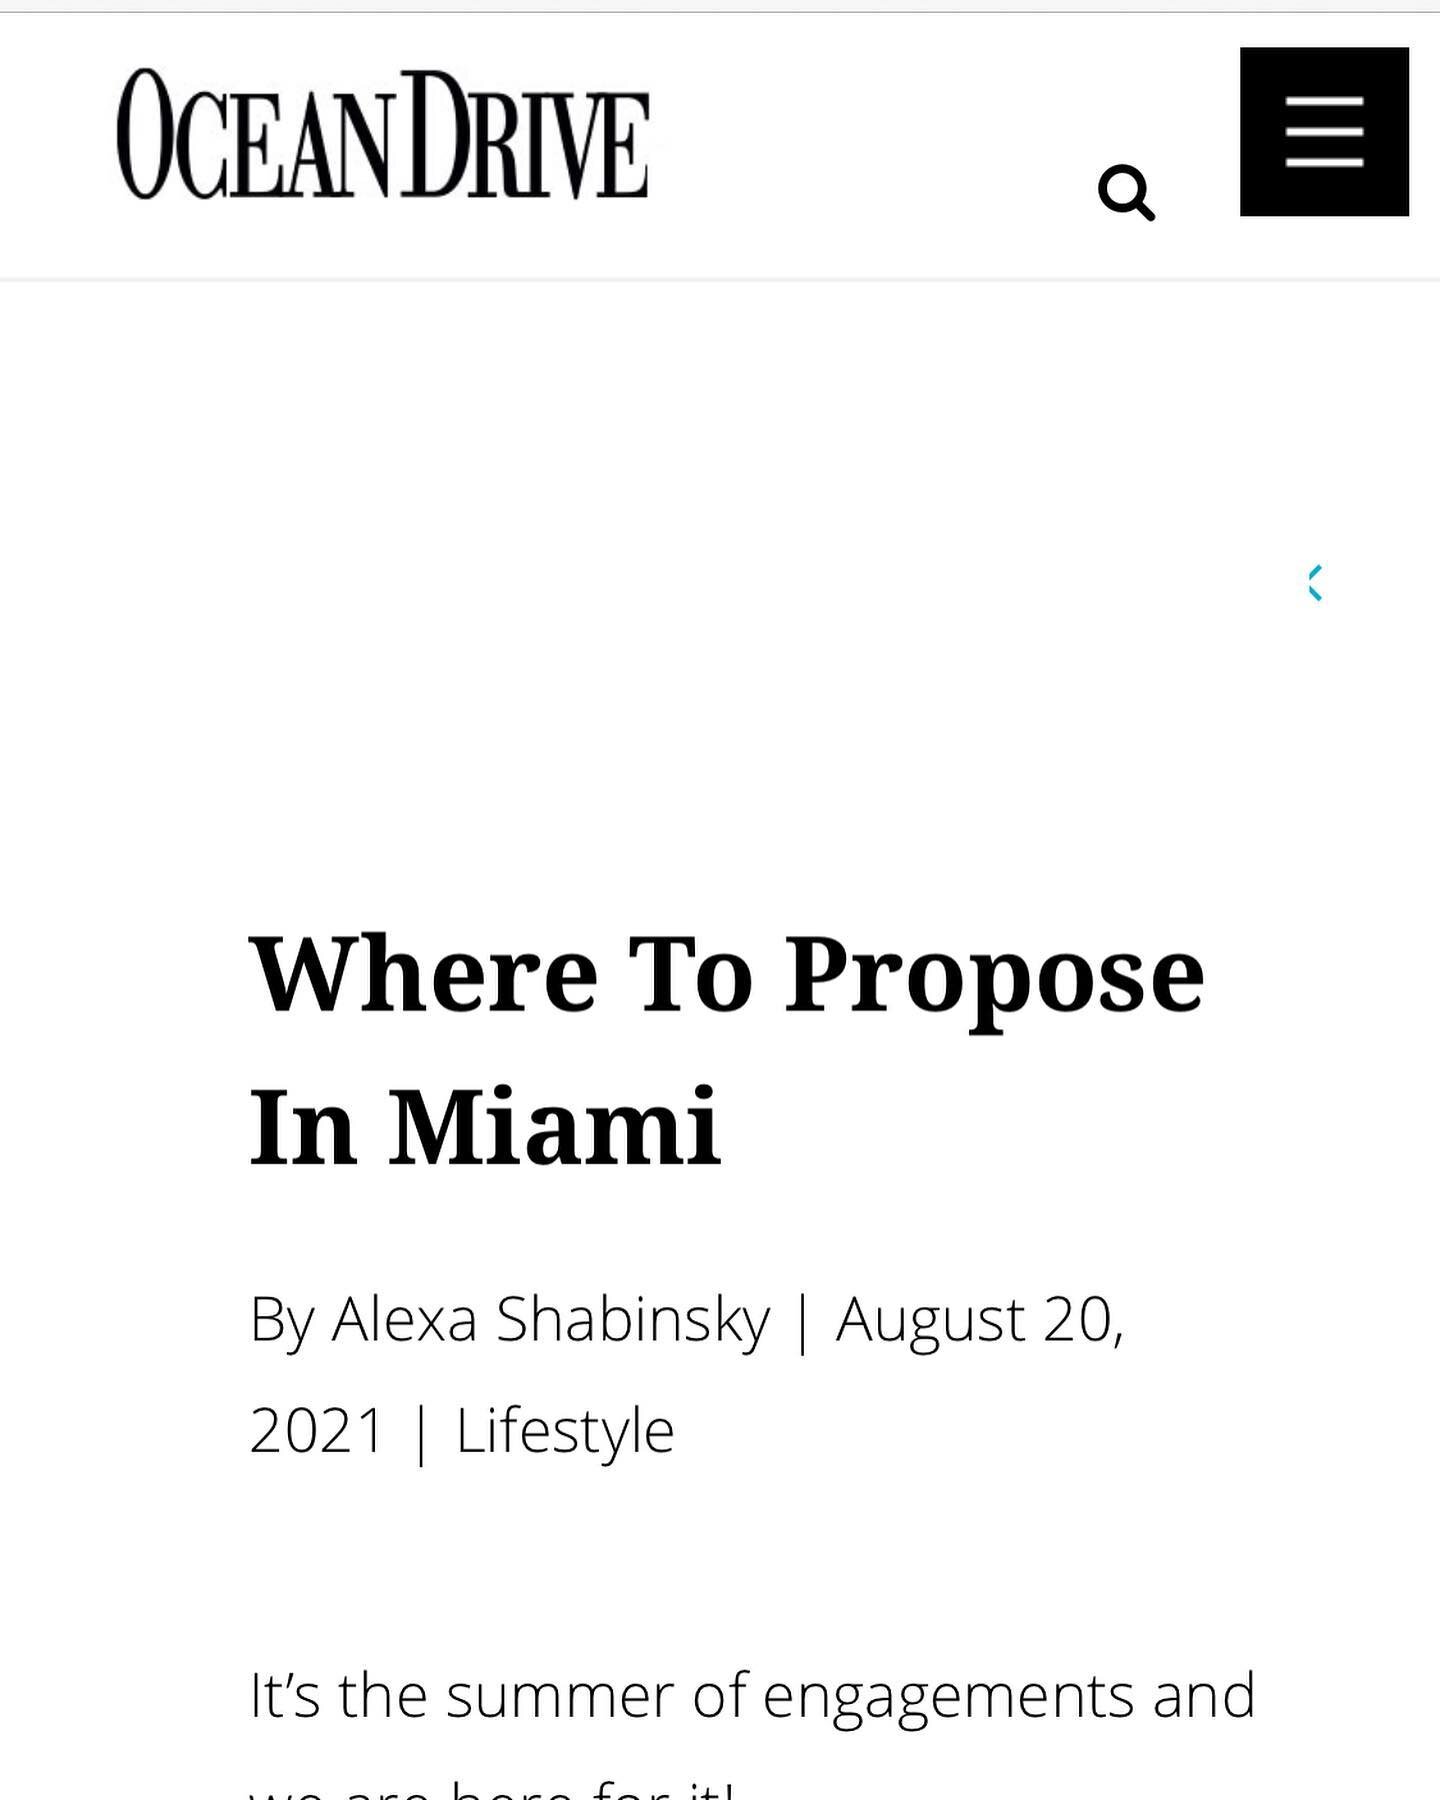 Thanks @oceandrivemag for the feature on Pro Yachting charters sailboat proposals and engagement photoshoots! We&rsquo;re honored to be featured in the best places to propose in Miami! Beautiful photo from @psphotofilms 📸 of our gorgeous charter gue